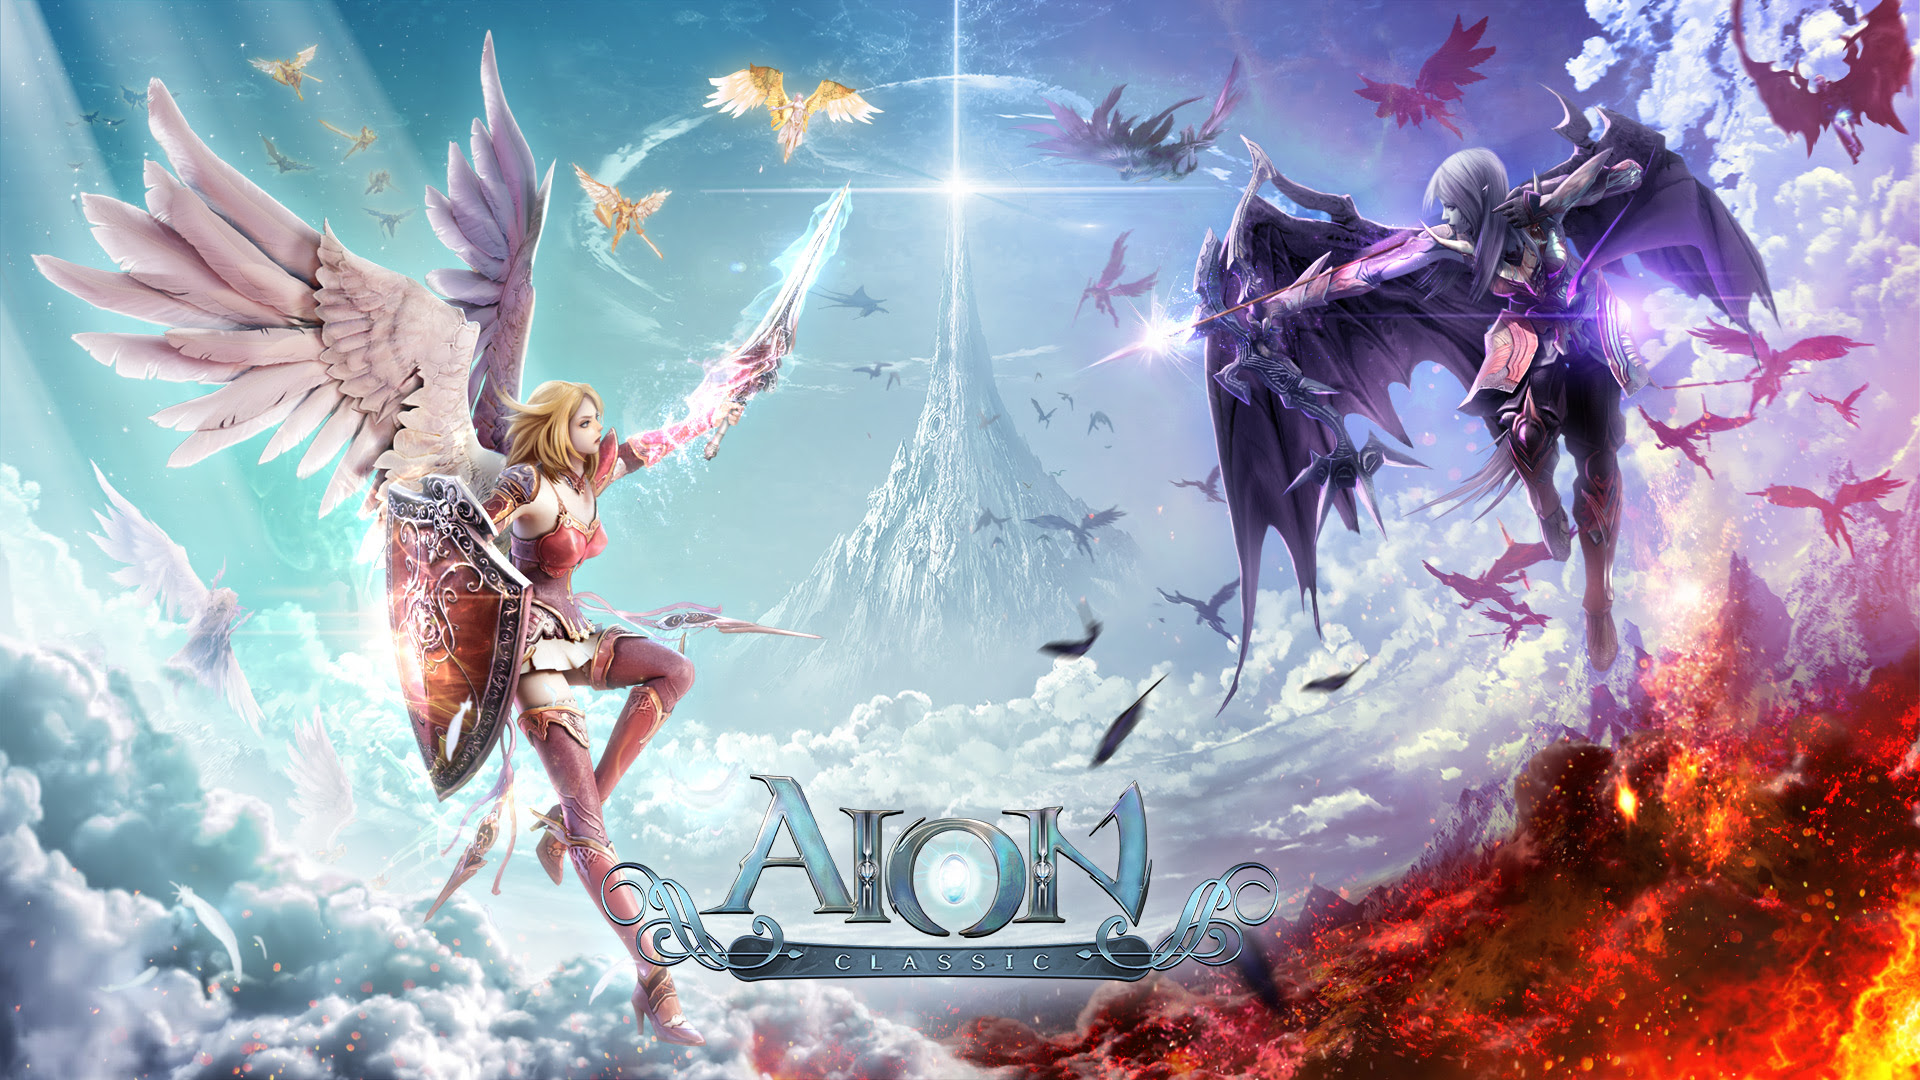  Fantasy MMORPG AION Classic gets Major Update 2.4 “Stormwing’s Revenge”! 